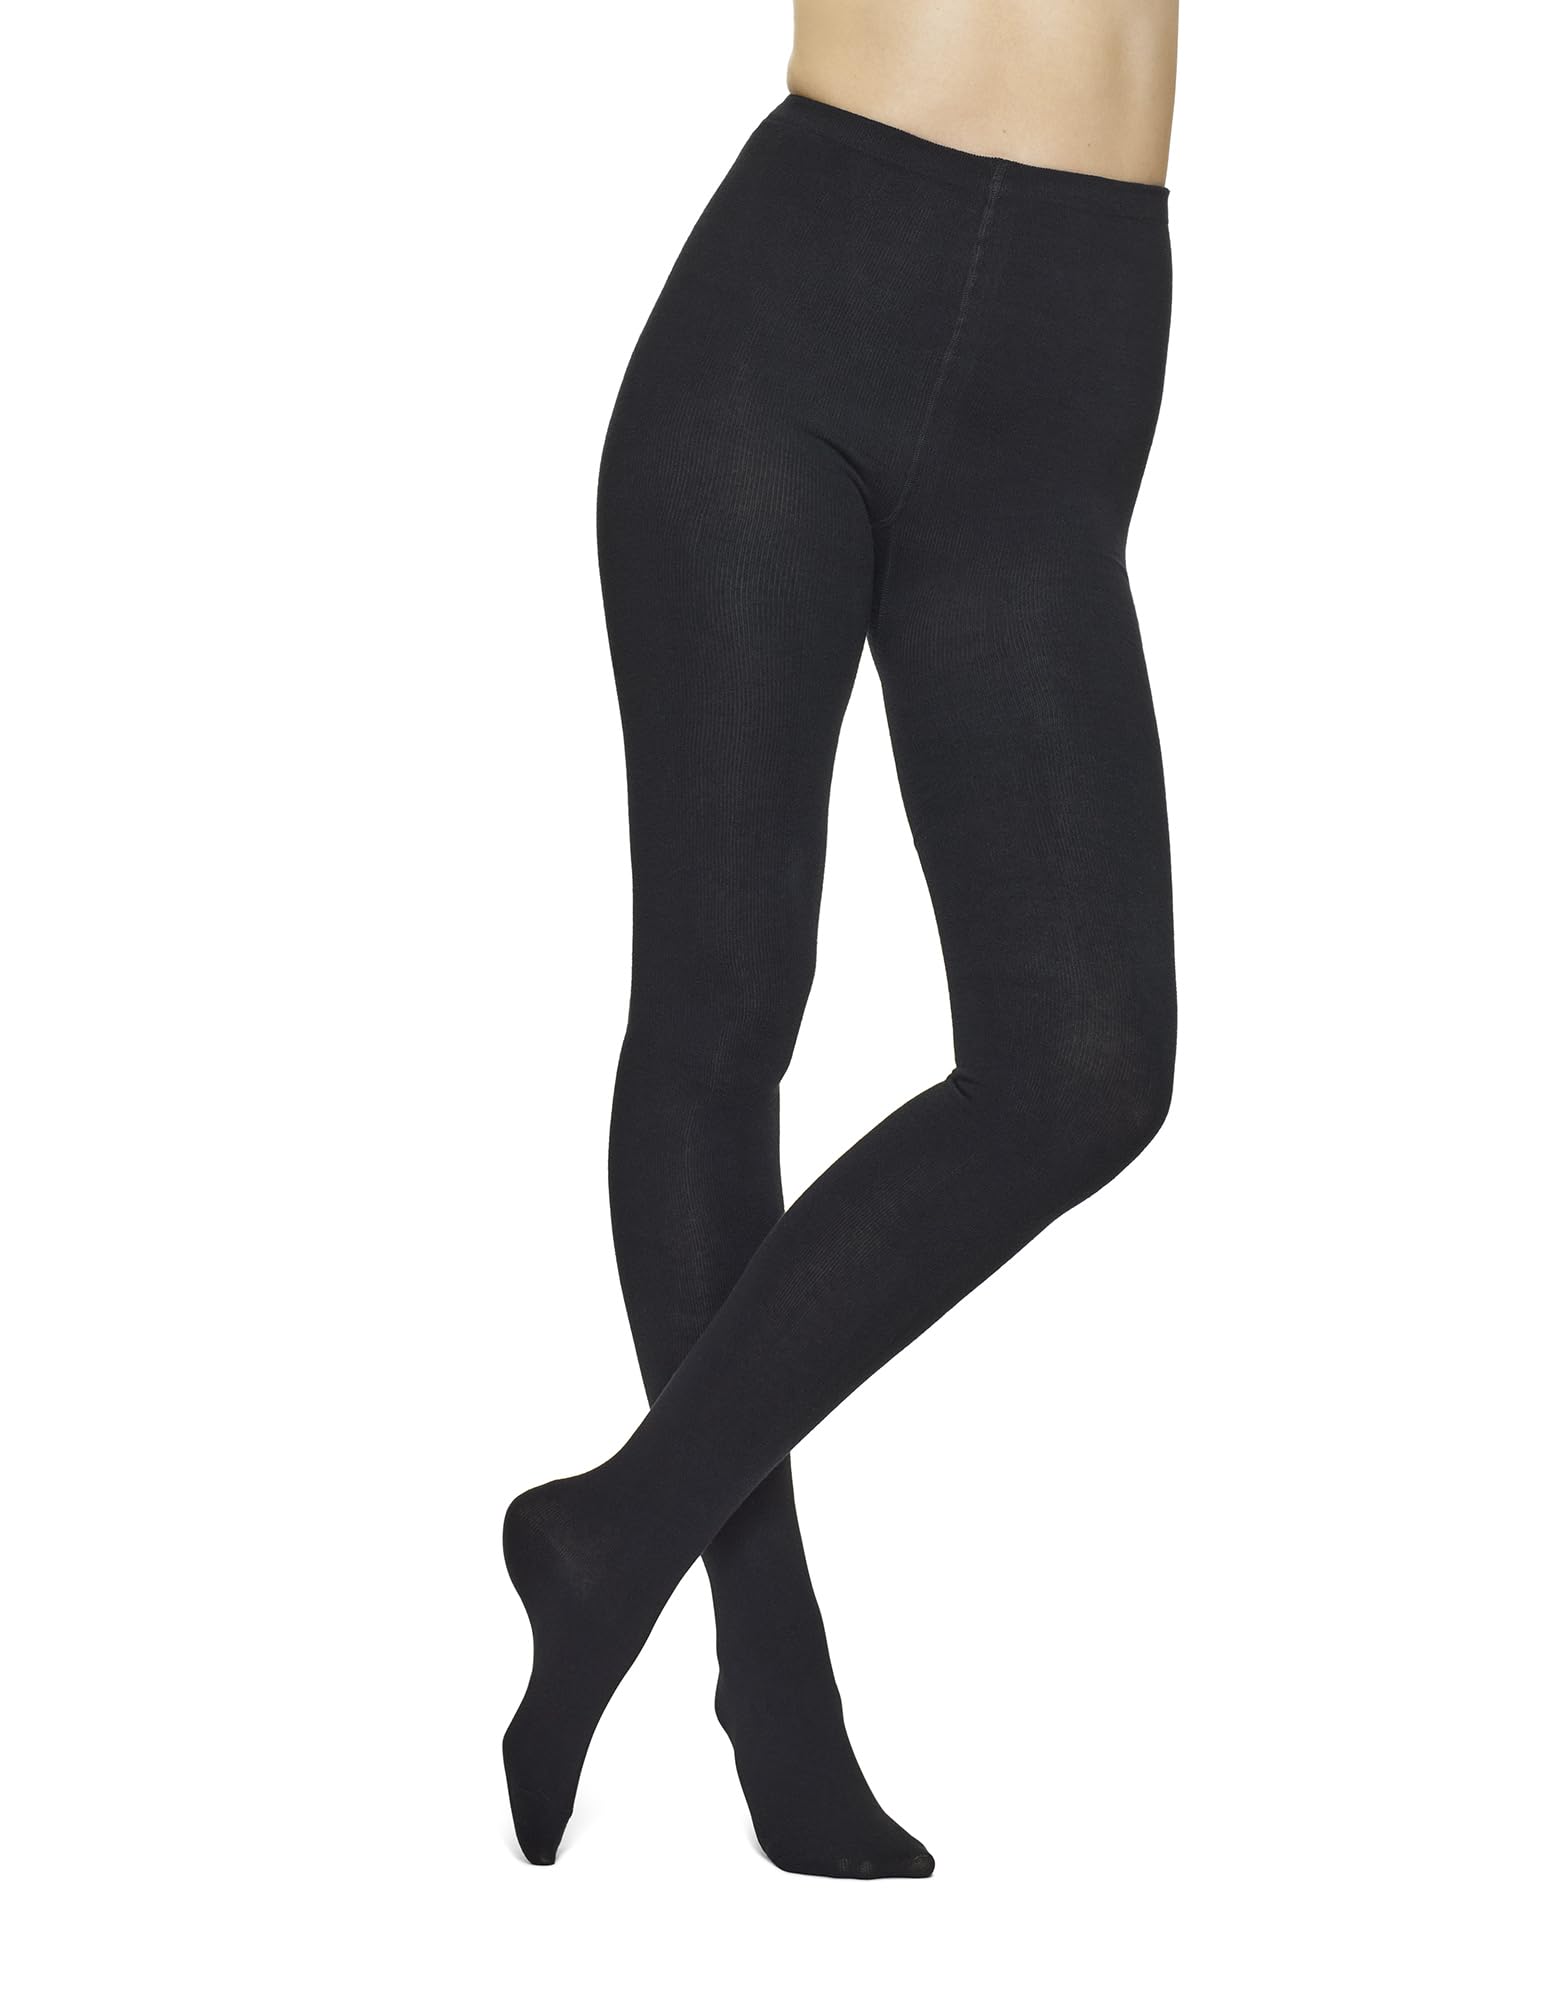 HUE Women's Sweater Tights